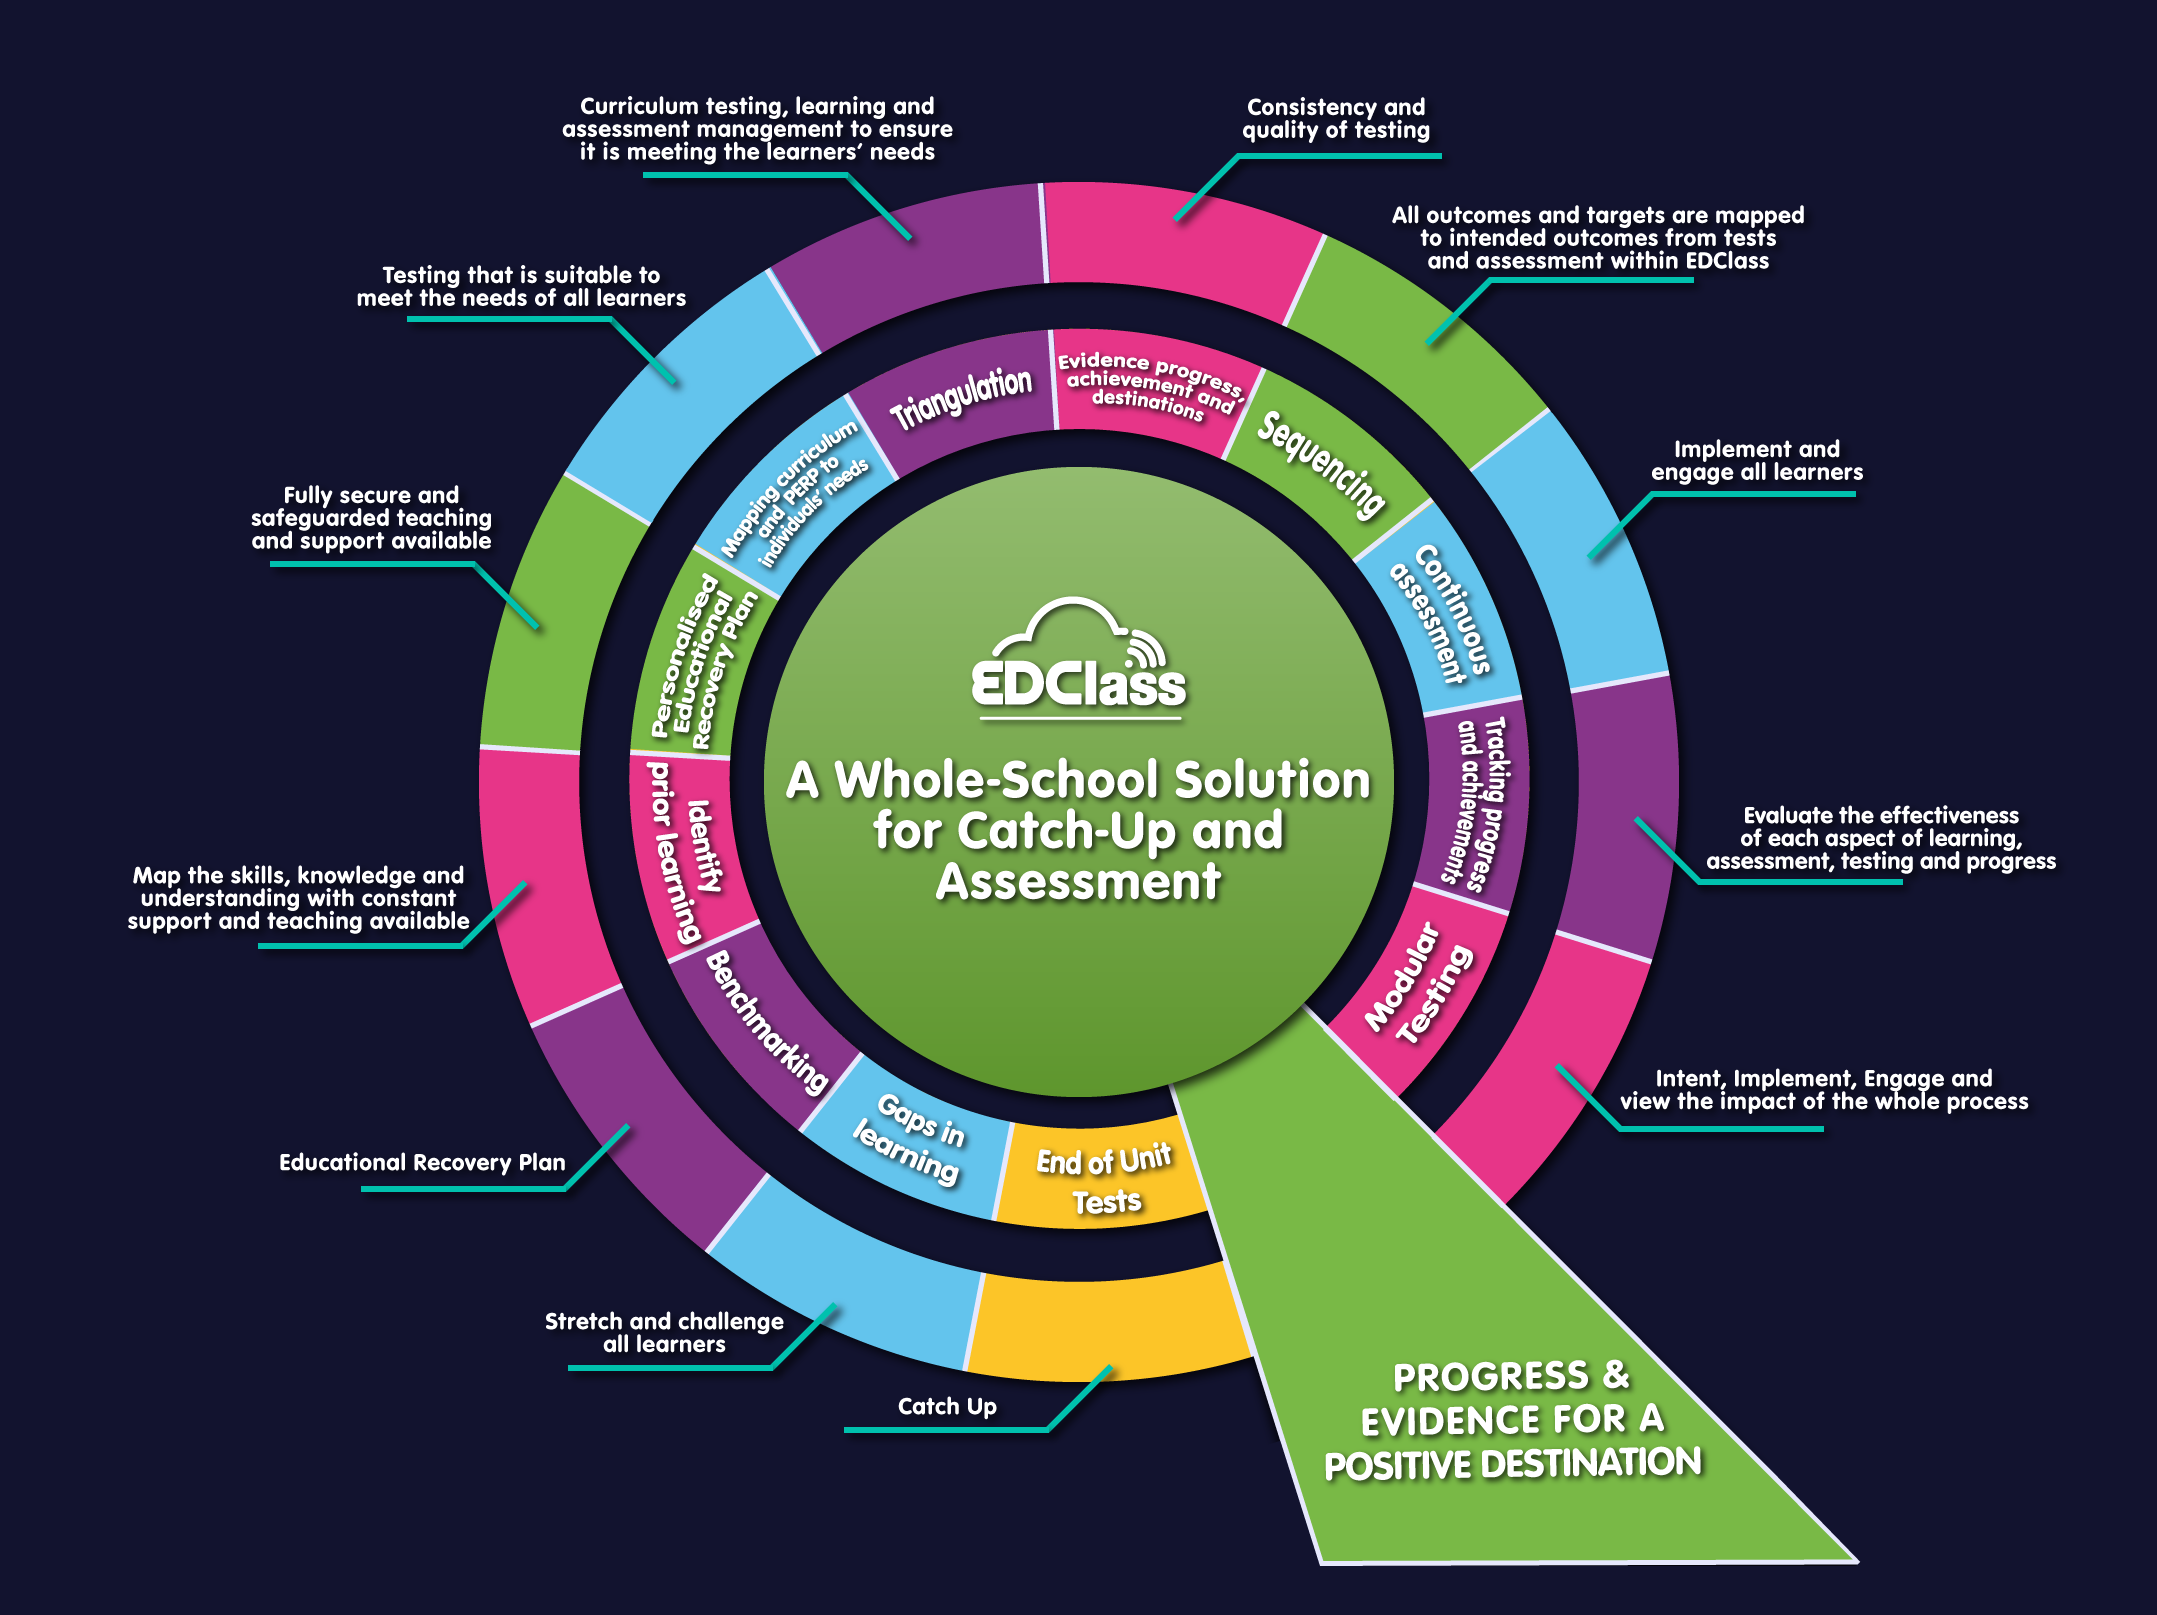 EDClass a whole school solution for catch-up and assessment